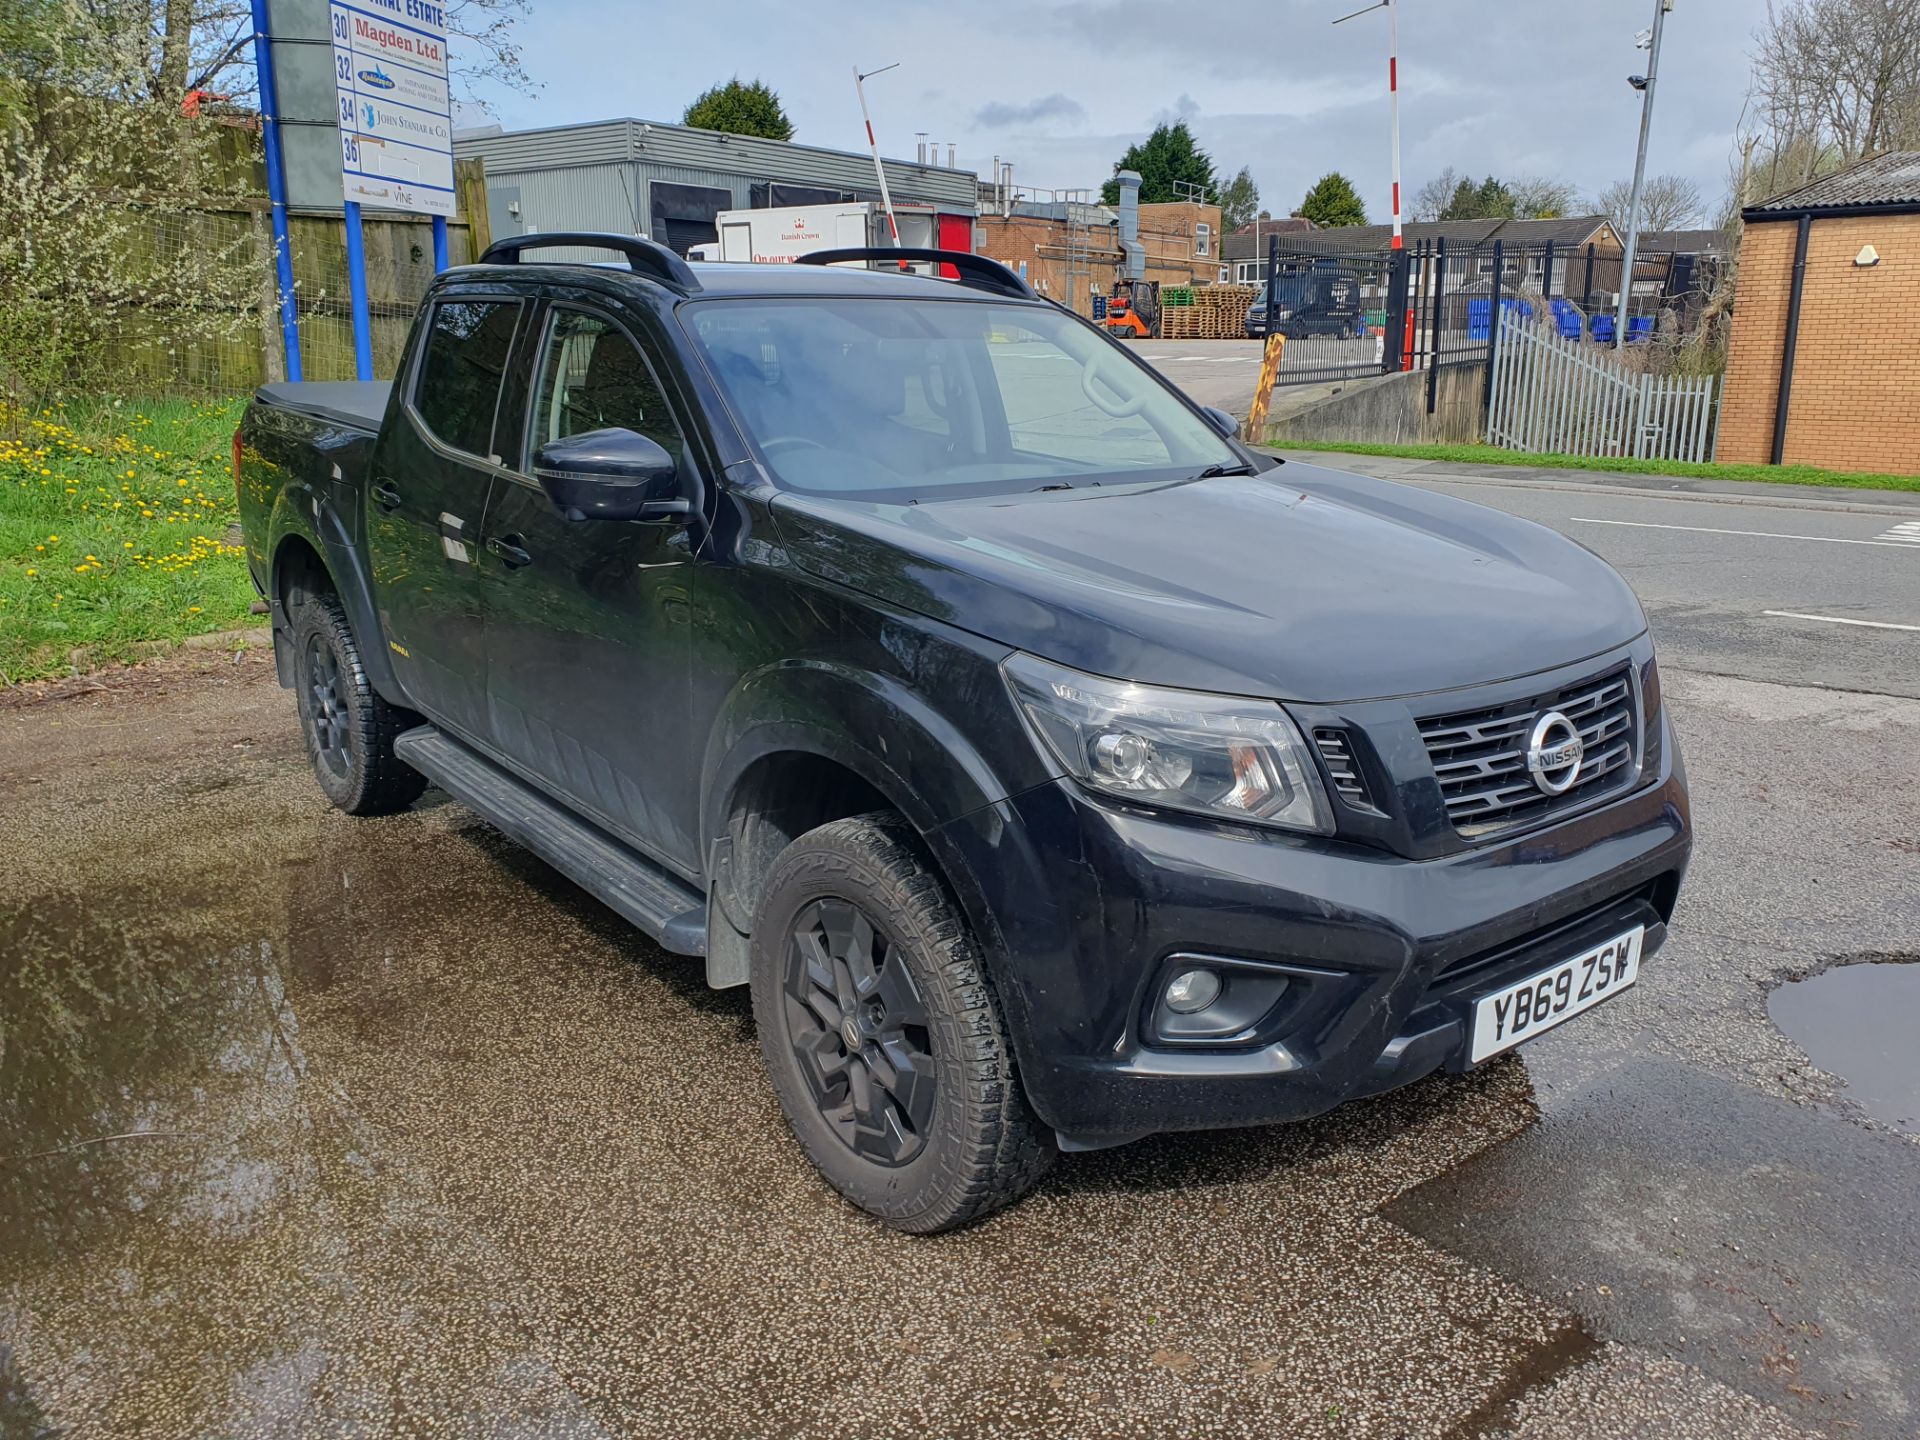 Nissan Navara N-guard DCI Auto | YB69 ZSW | Black | Automatic | 29,409 Miles | VAT APPLICABLE - Image 3 of 25